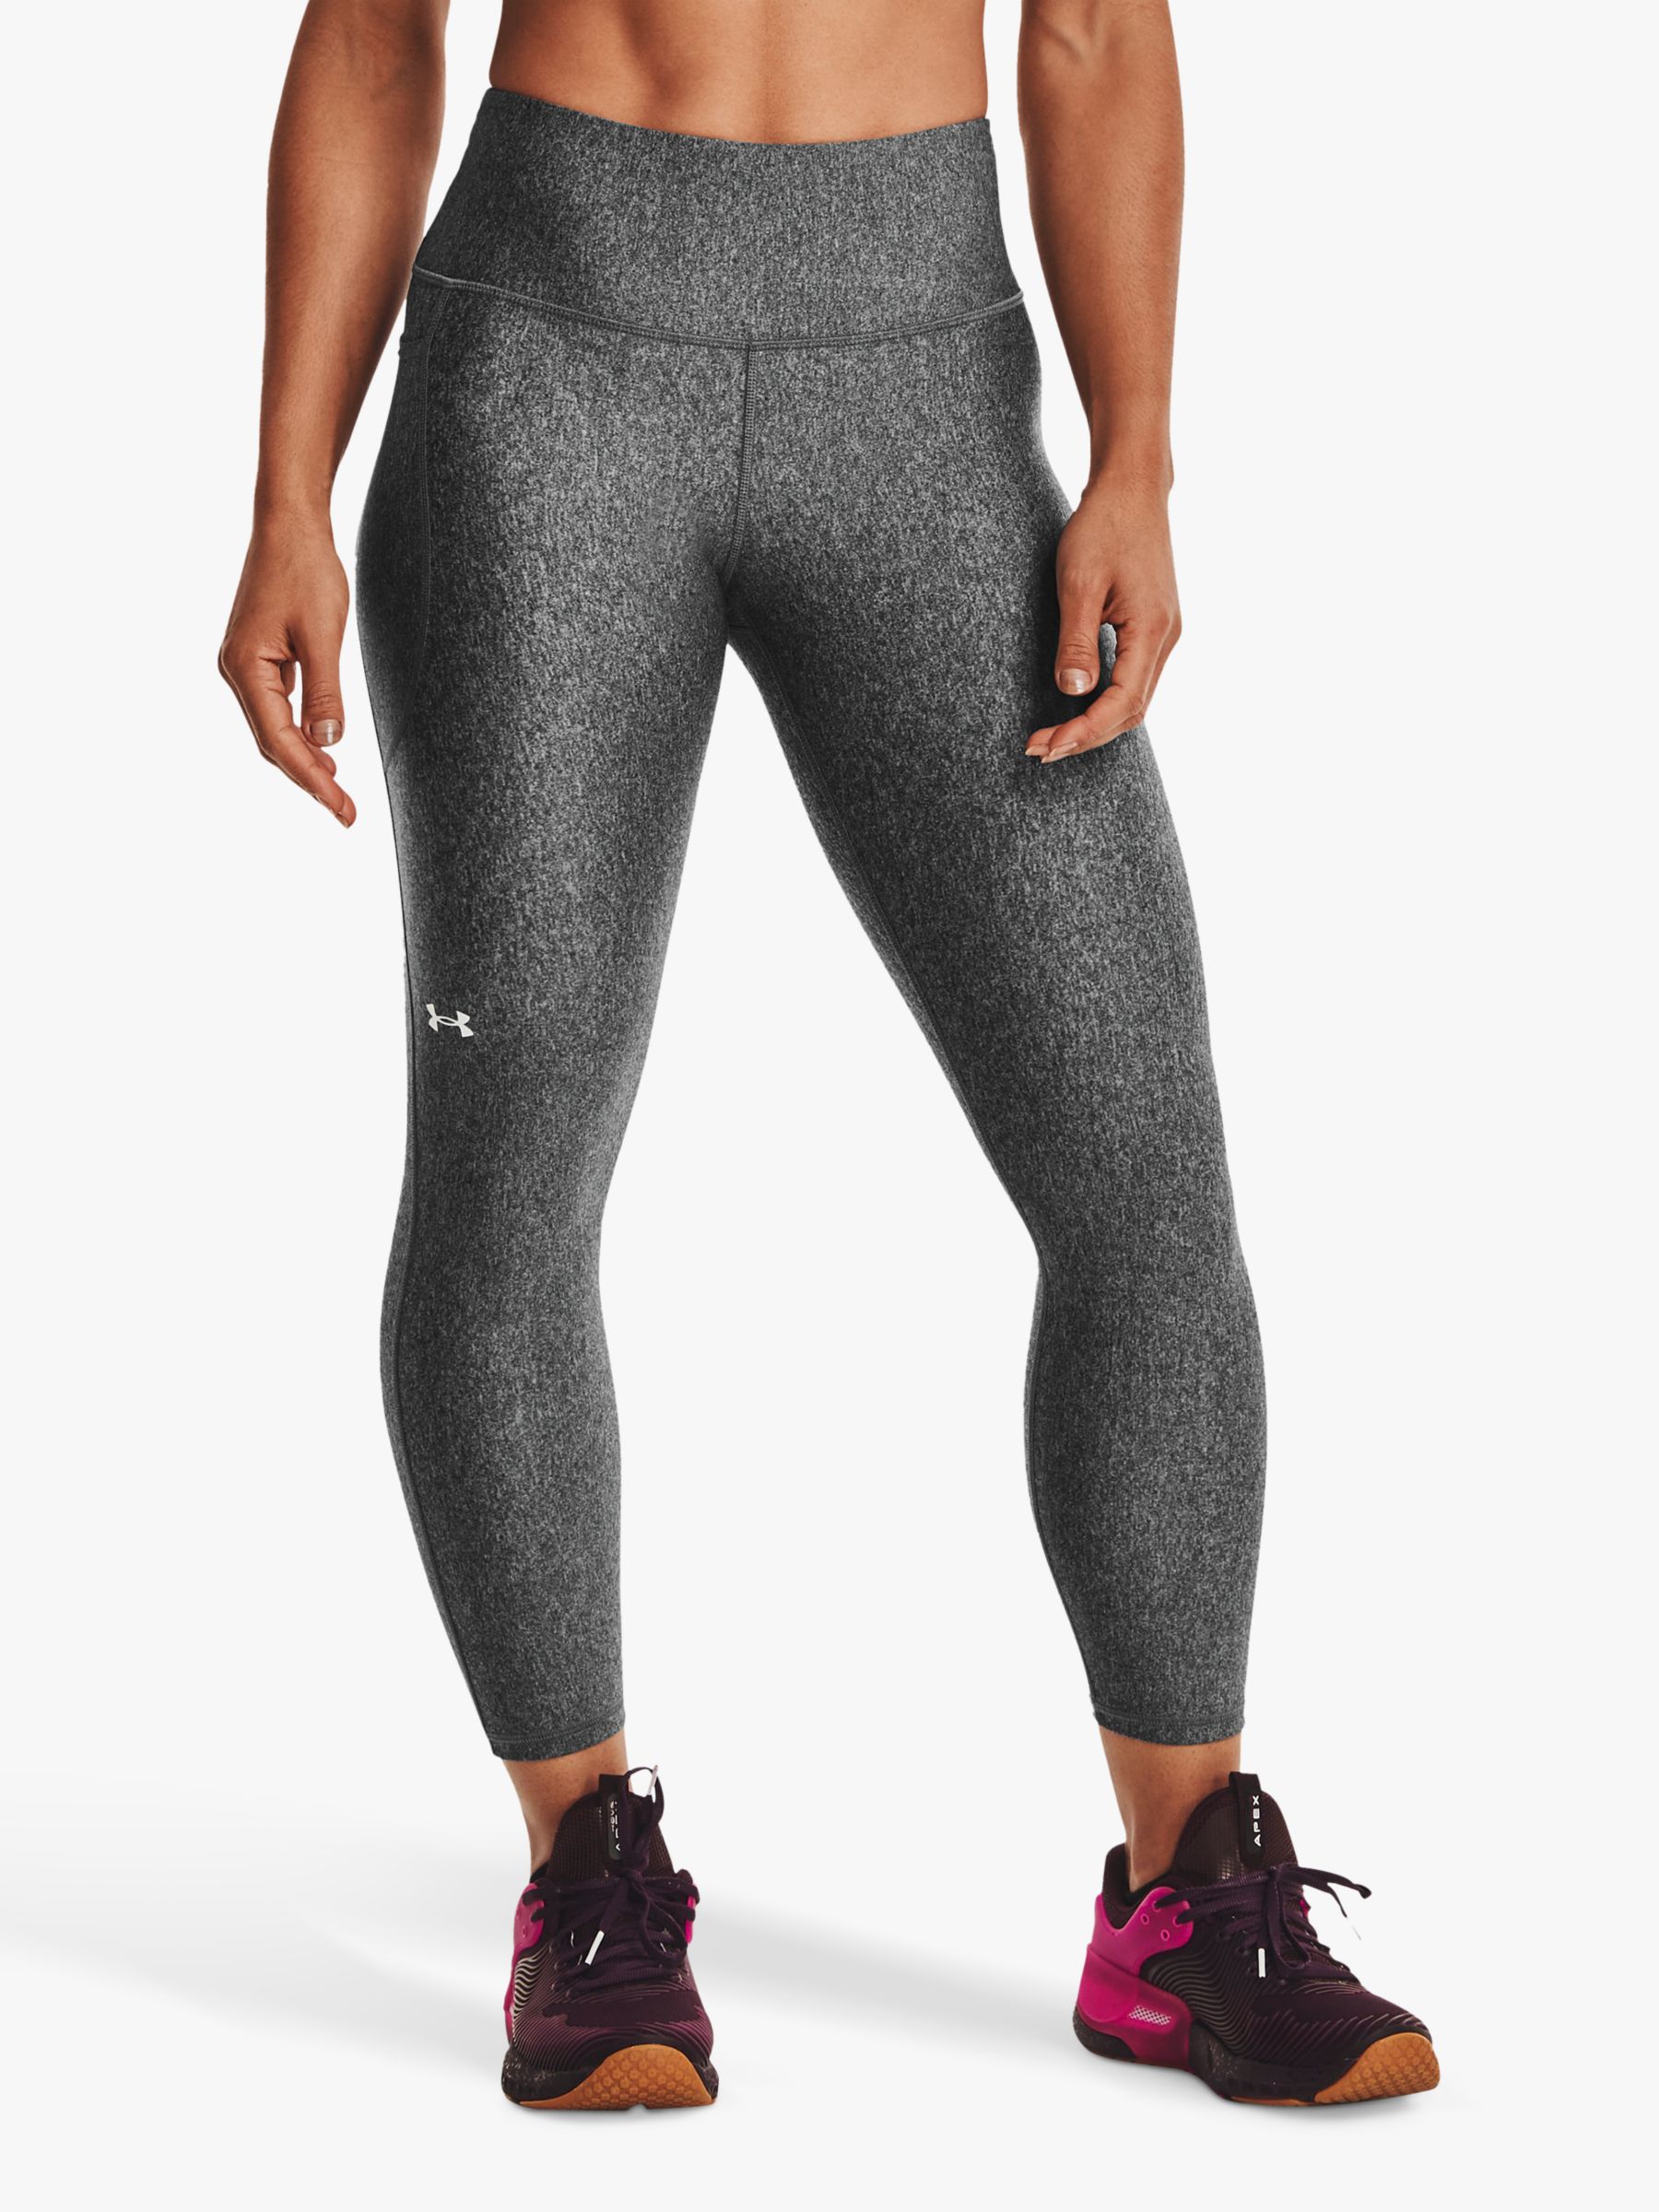 Under Armour Women's Leggings, HeatGear Tight Compression Ankle Fitted $45